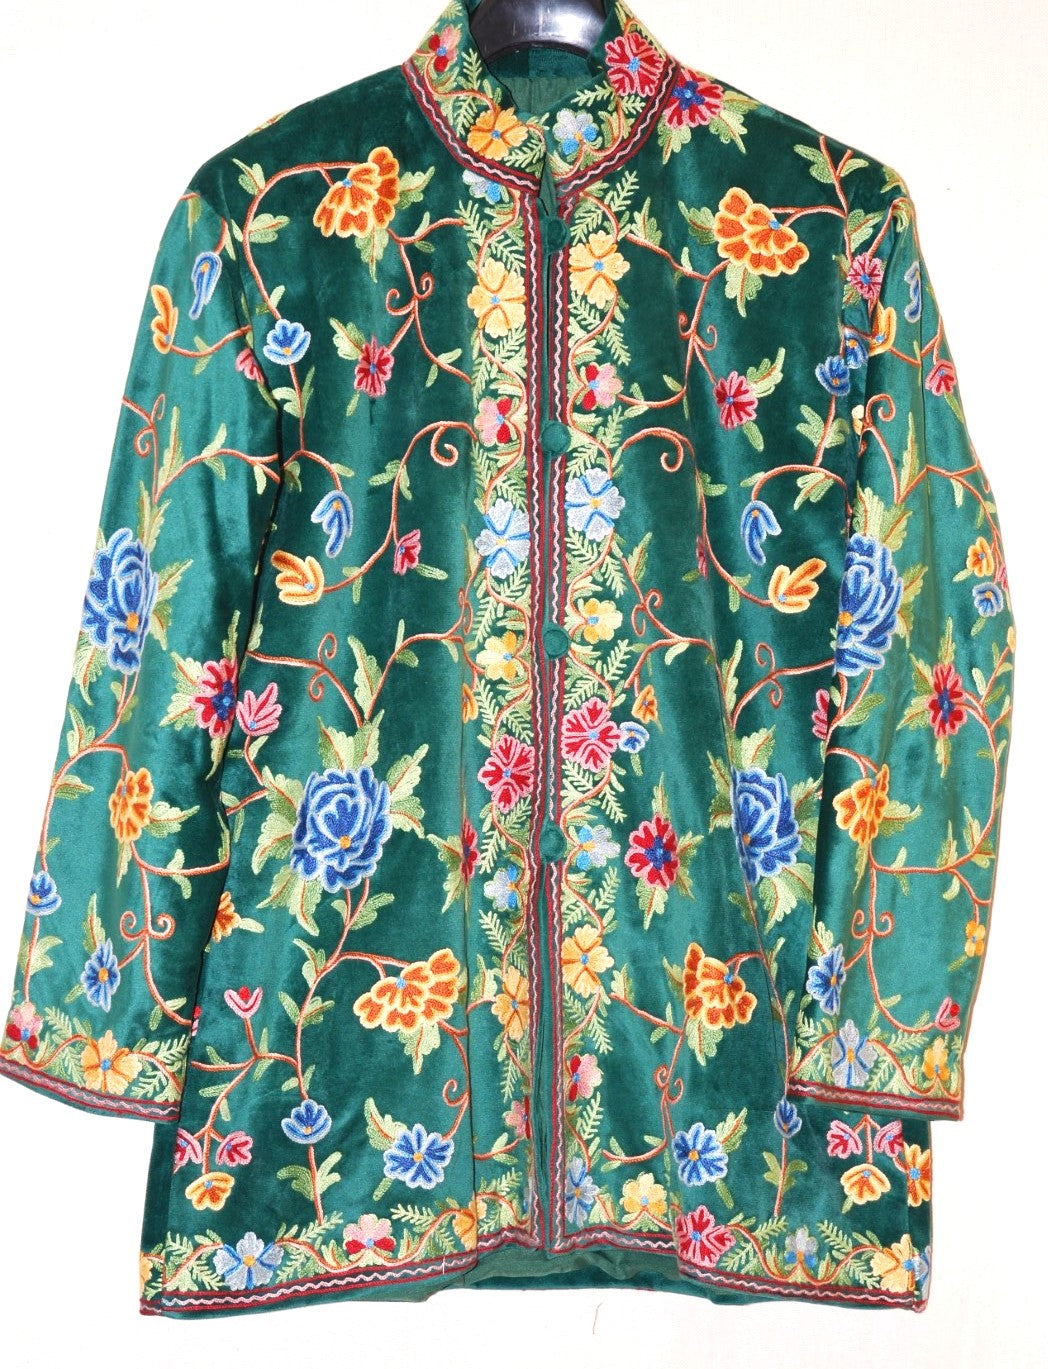 Embroidered Velvet Jacket Green, Multicolor Embroidery #AO-702